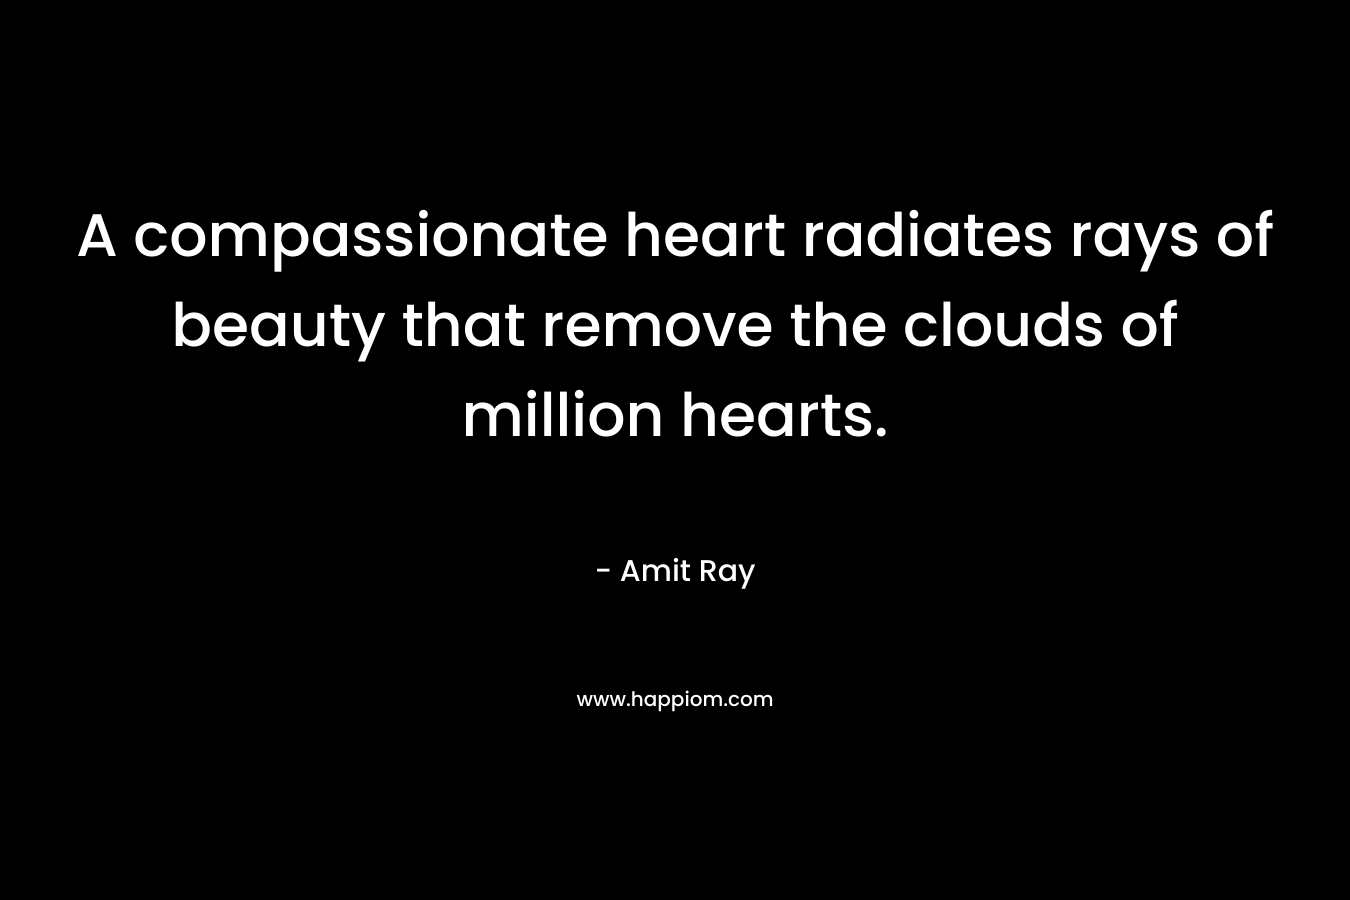 A compassionate heart radiates rays of beauty that remove the clouds of million hearts.